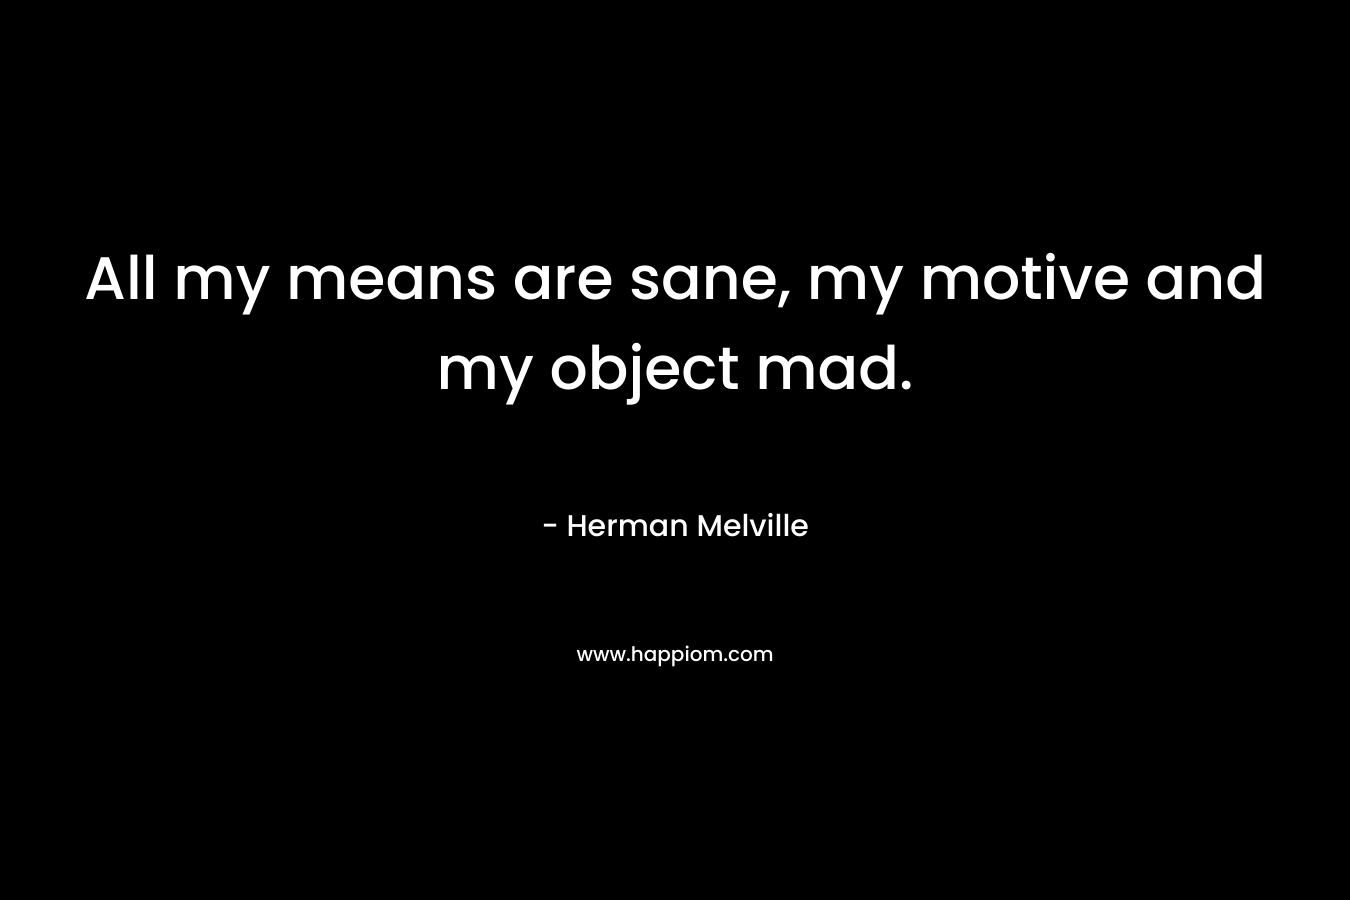 All my means are sane, my motive and my object mad. – Herman Melville